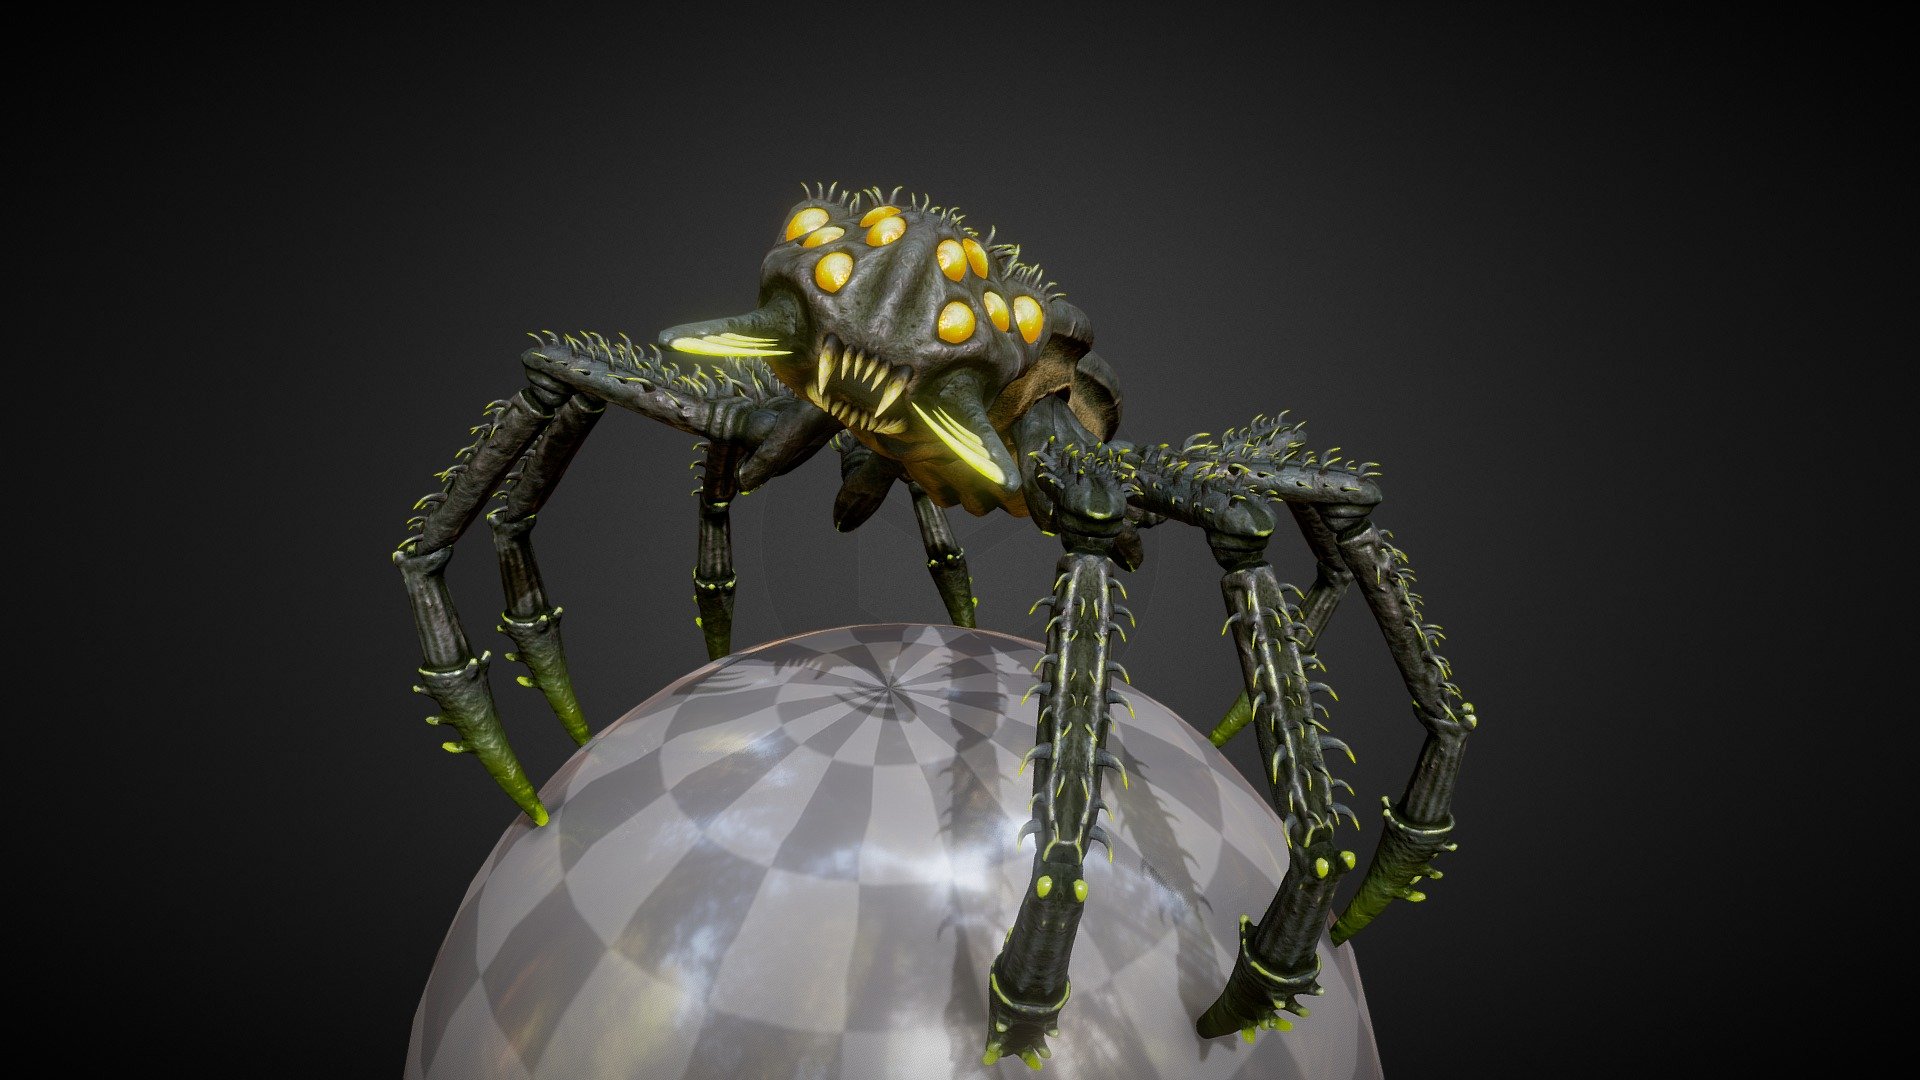 Spider based creature created on Blender and textured with Substance Painter. This one comes with three texture sets for you to pick your preferable.
Complete model, with UV mapped textures, and rigged with couple animations ready. Be sure to check out more of my models in my profile if you like this one. Thanks for passing by! - Spider Creature - Crawler Arach - Buy Royalty Free 3D model by Greg Kieroj (@GregKDev) 3d model